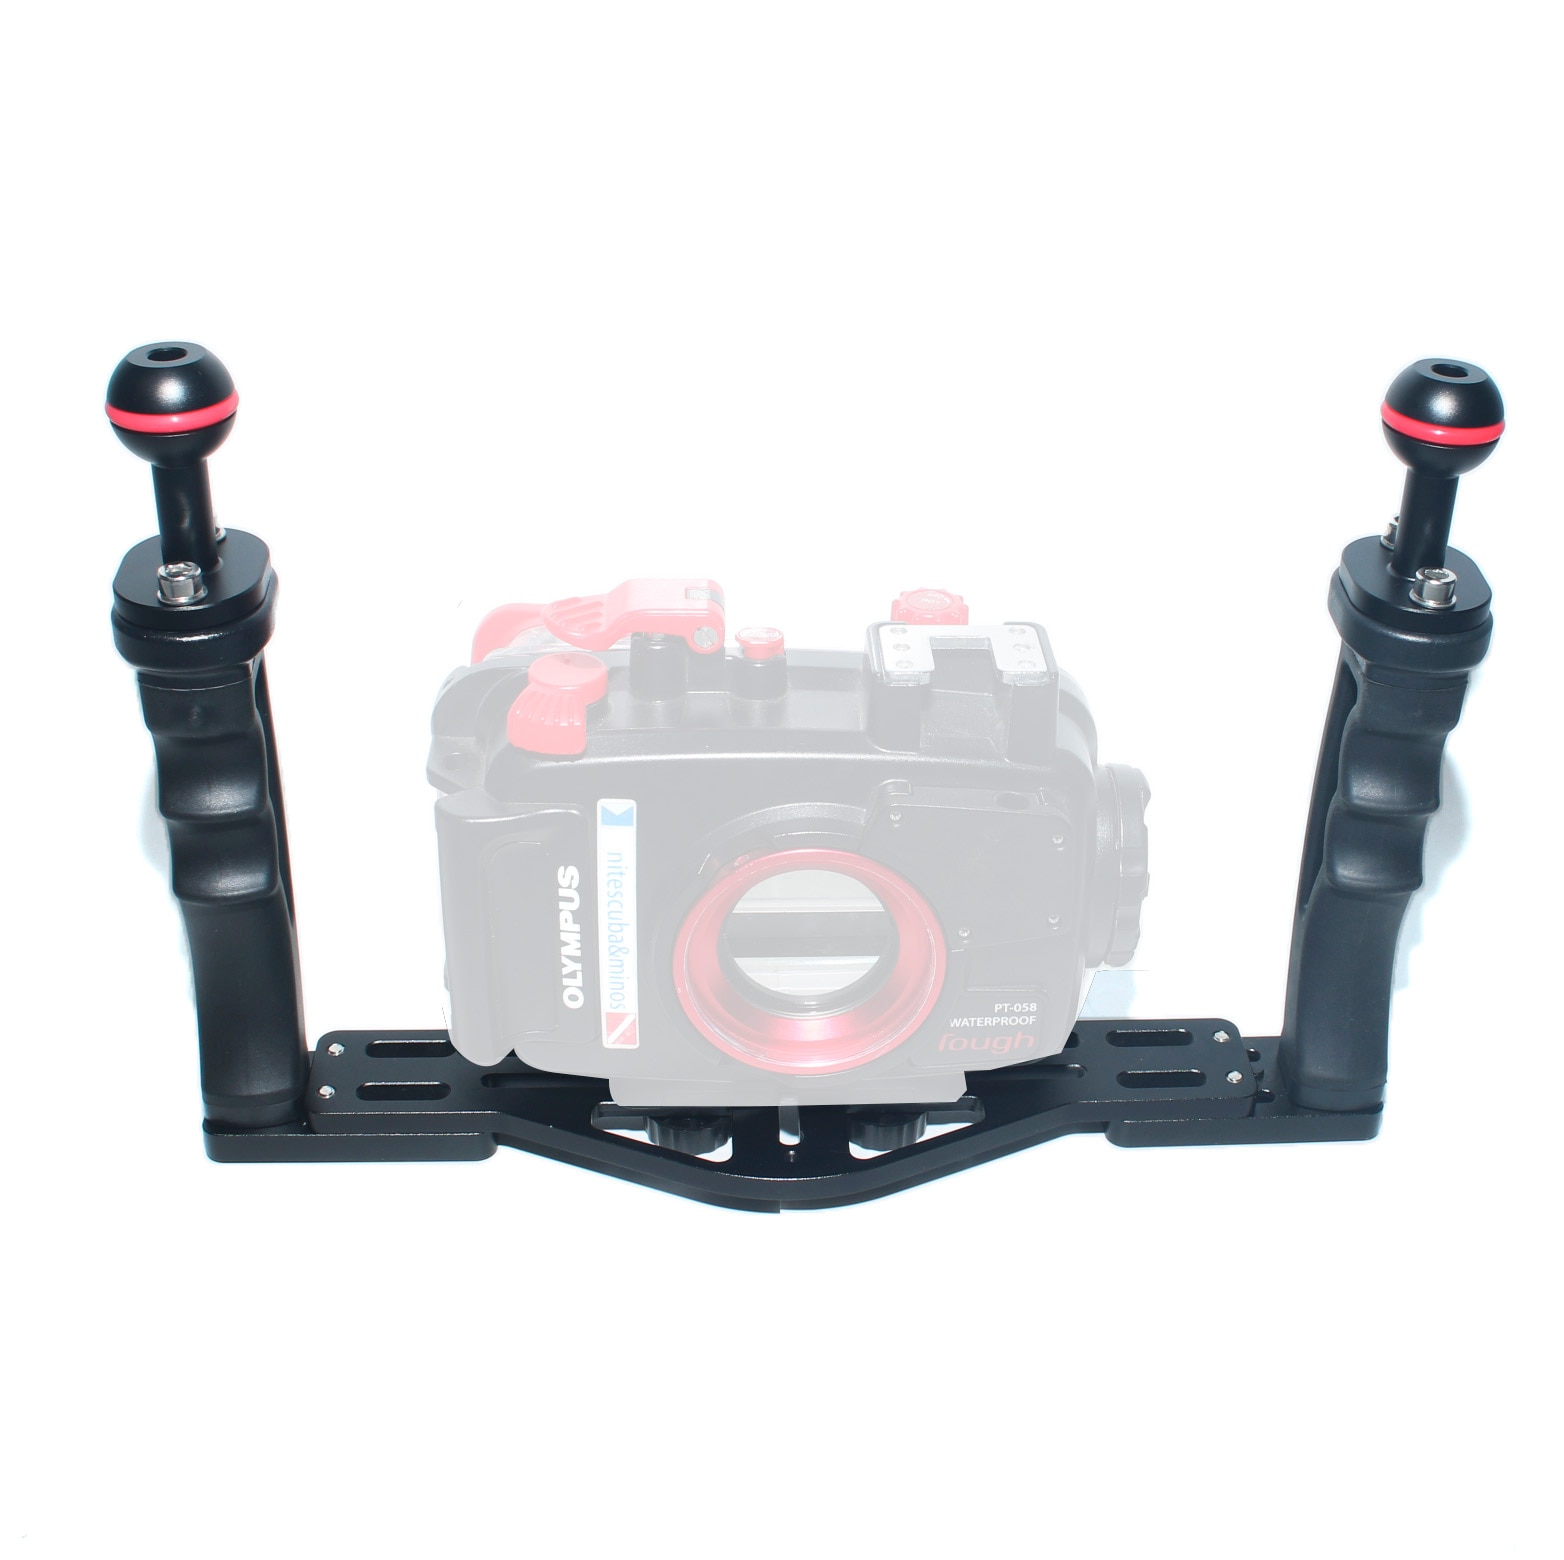 Nitescuba NS10 tray for gopro/divevolk seatouch 4/action camera housing